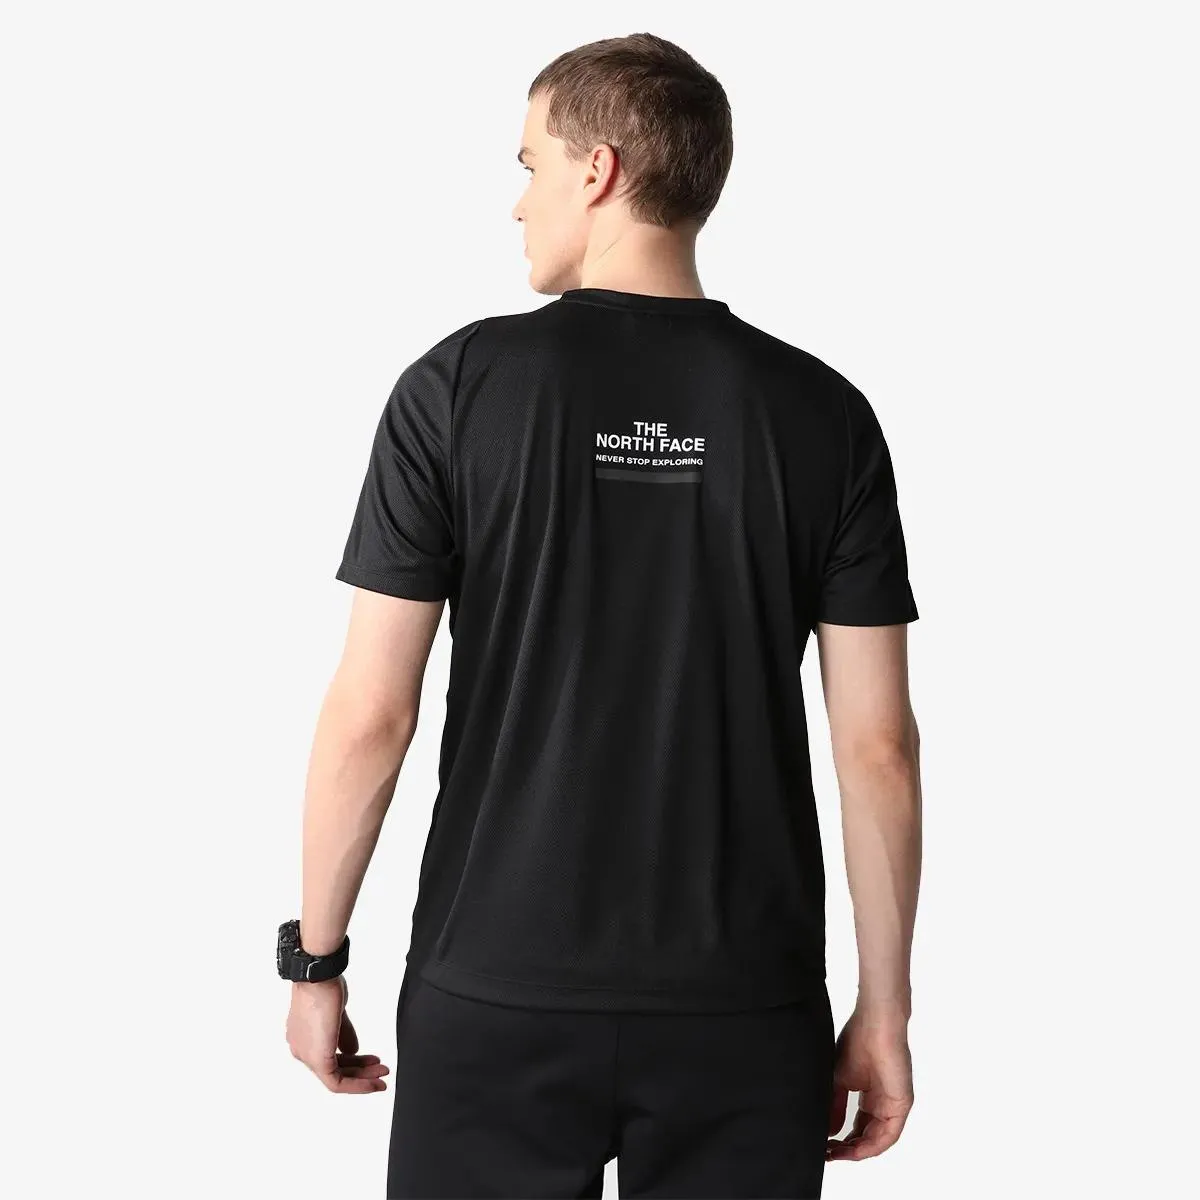 The North Face T-shirt MA 